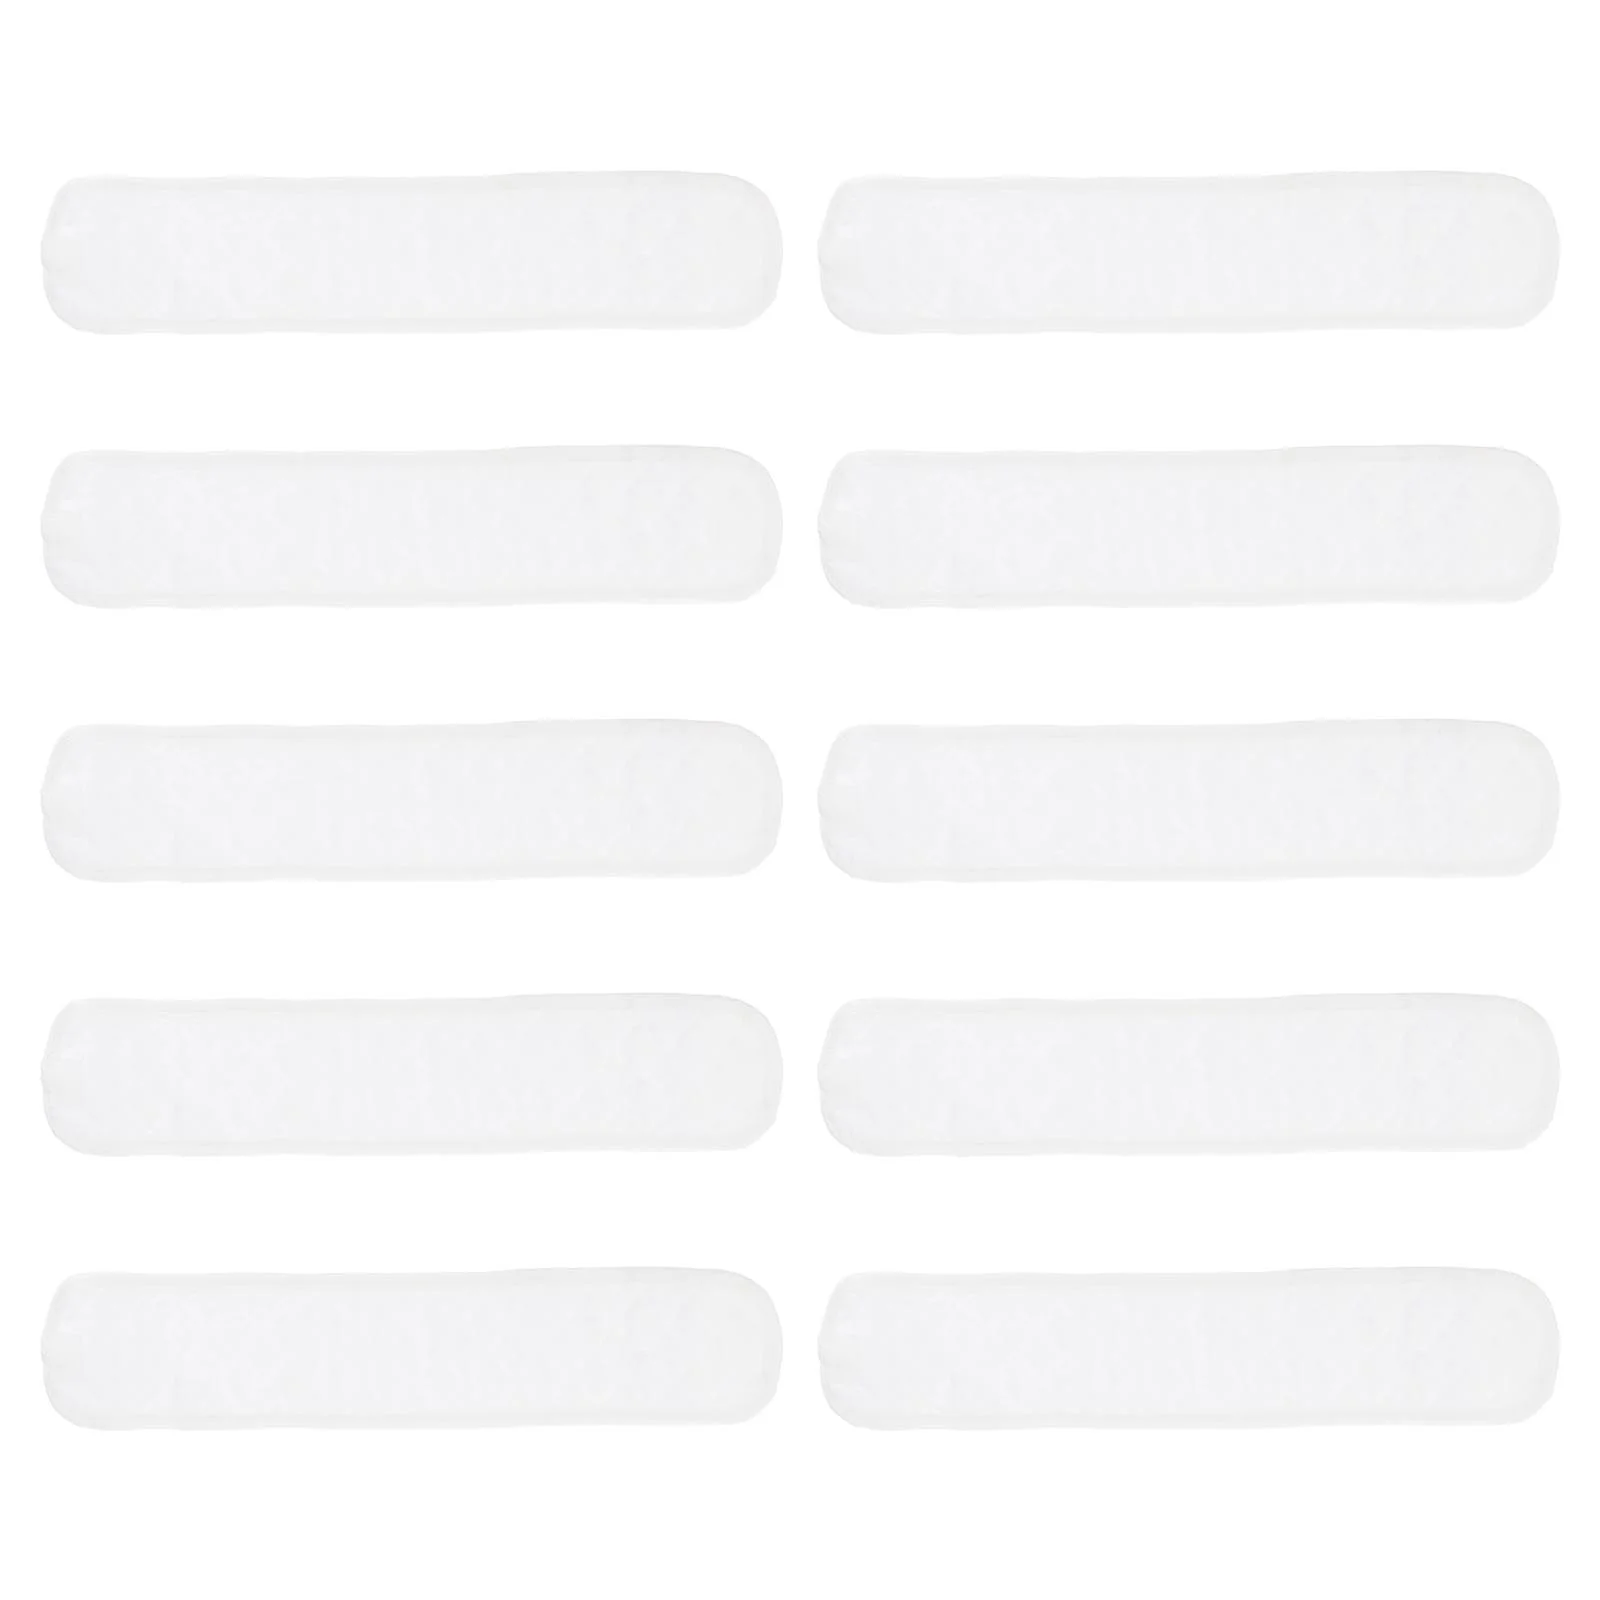 10Pcs infant navel belt Belly Band Cotton Umbilical Bands White Breathable Newborn Infant newborn belly band Bands infant belly 4pcs baby belly band infant umbilical belt newborn navel hernia truss beltbutton protector bellyband infant care navel guard